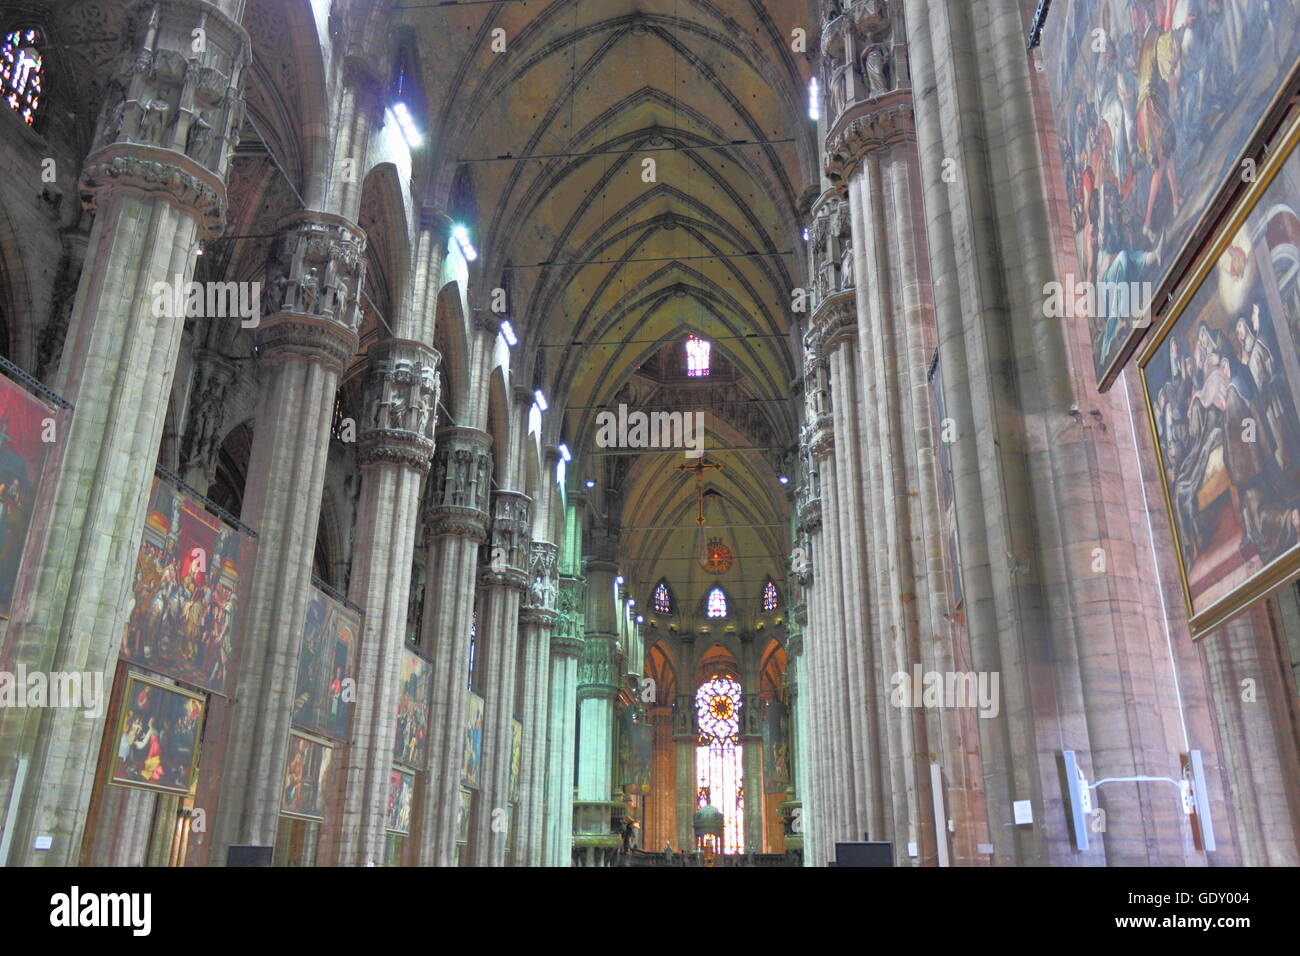 Interior of the Milan cathedral Stock Photo